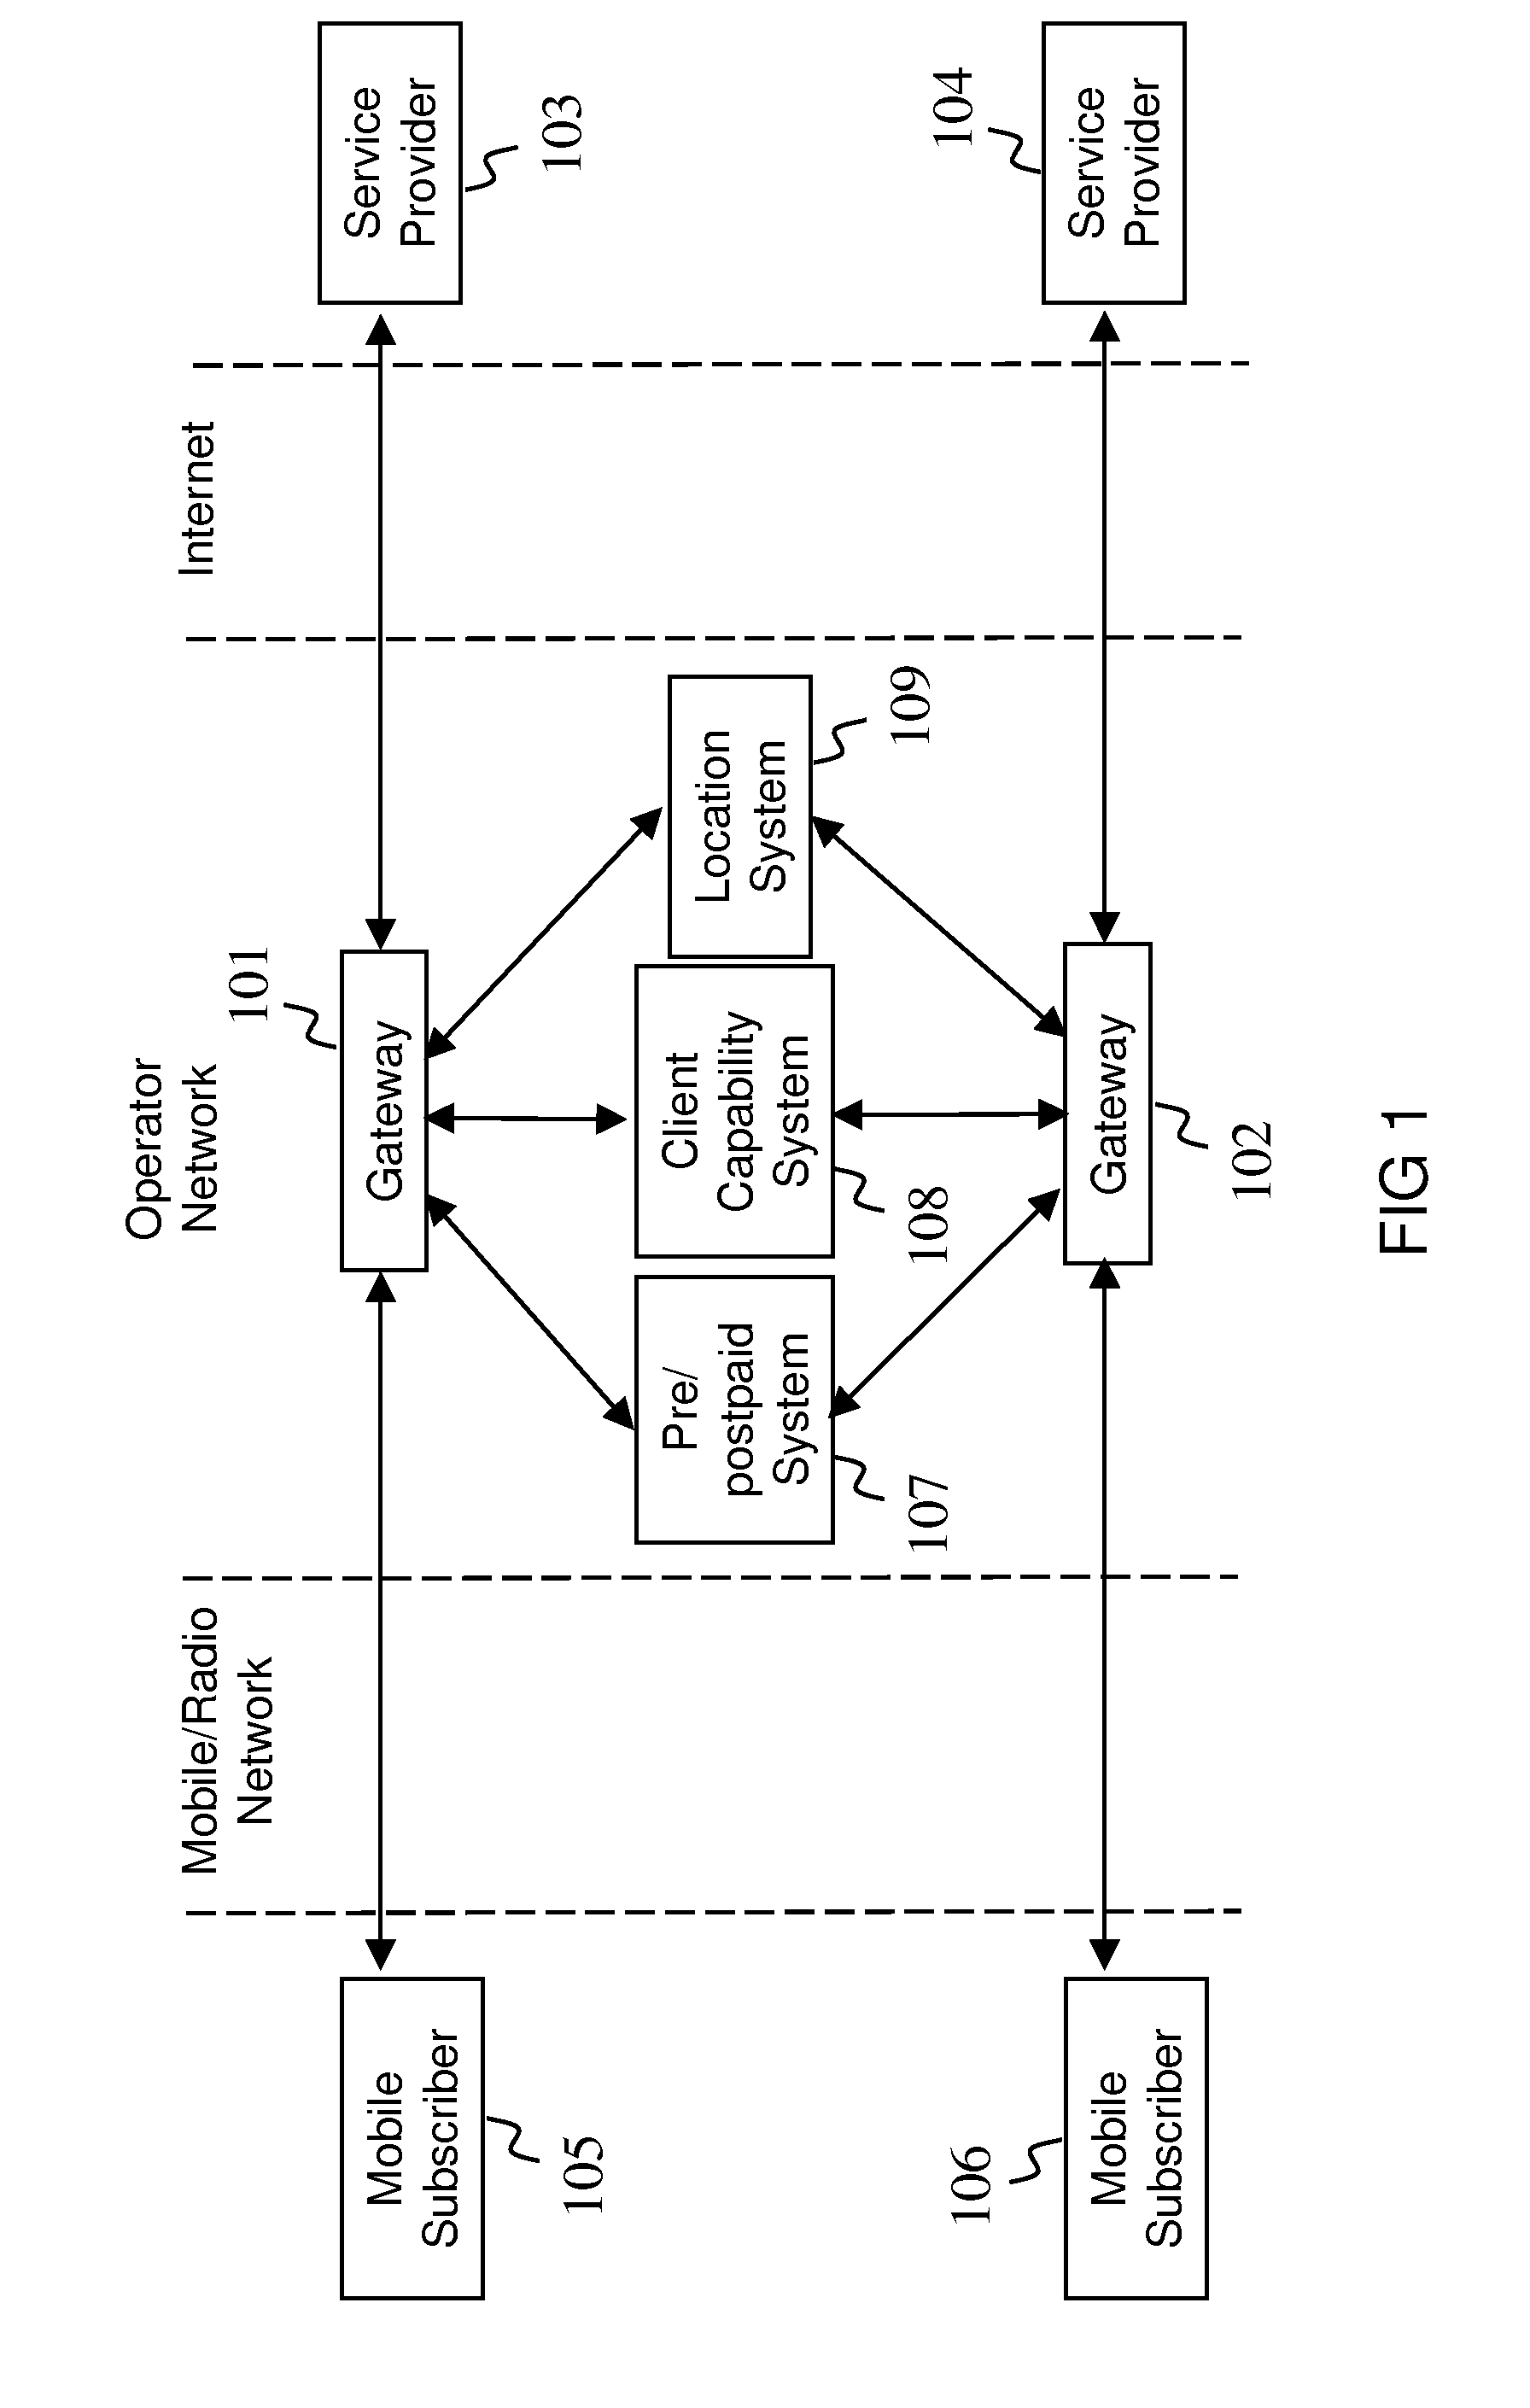 Information Gathering From Traffic Flow in a Communication Network